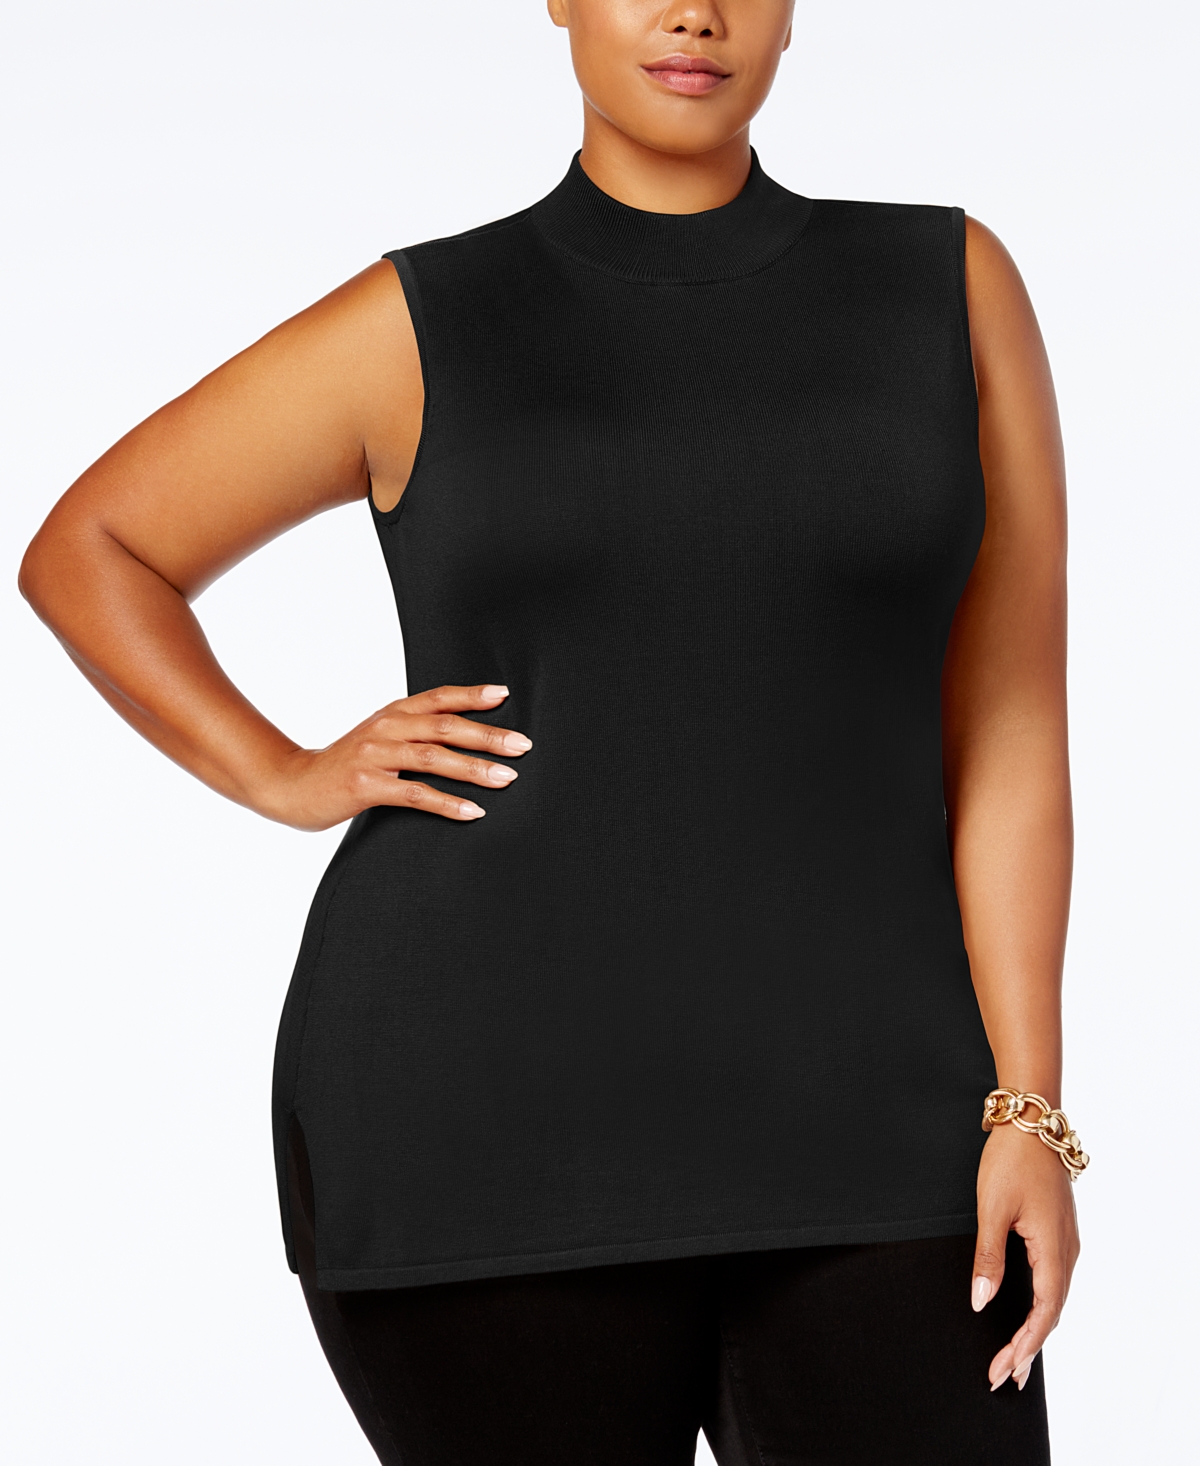 Jm Collection Plus Size Mock-Neck Sleeveless Sweater, Created for Macy's